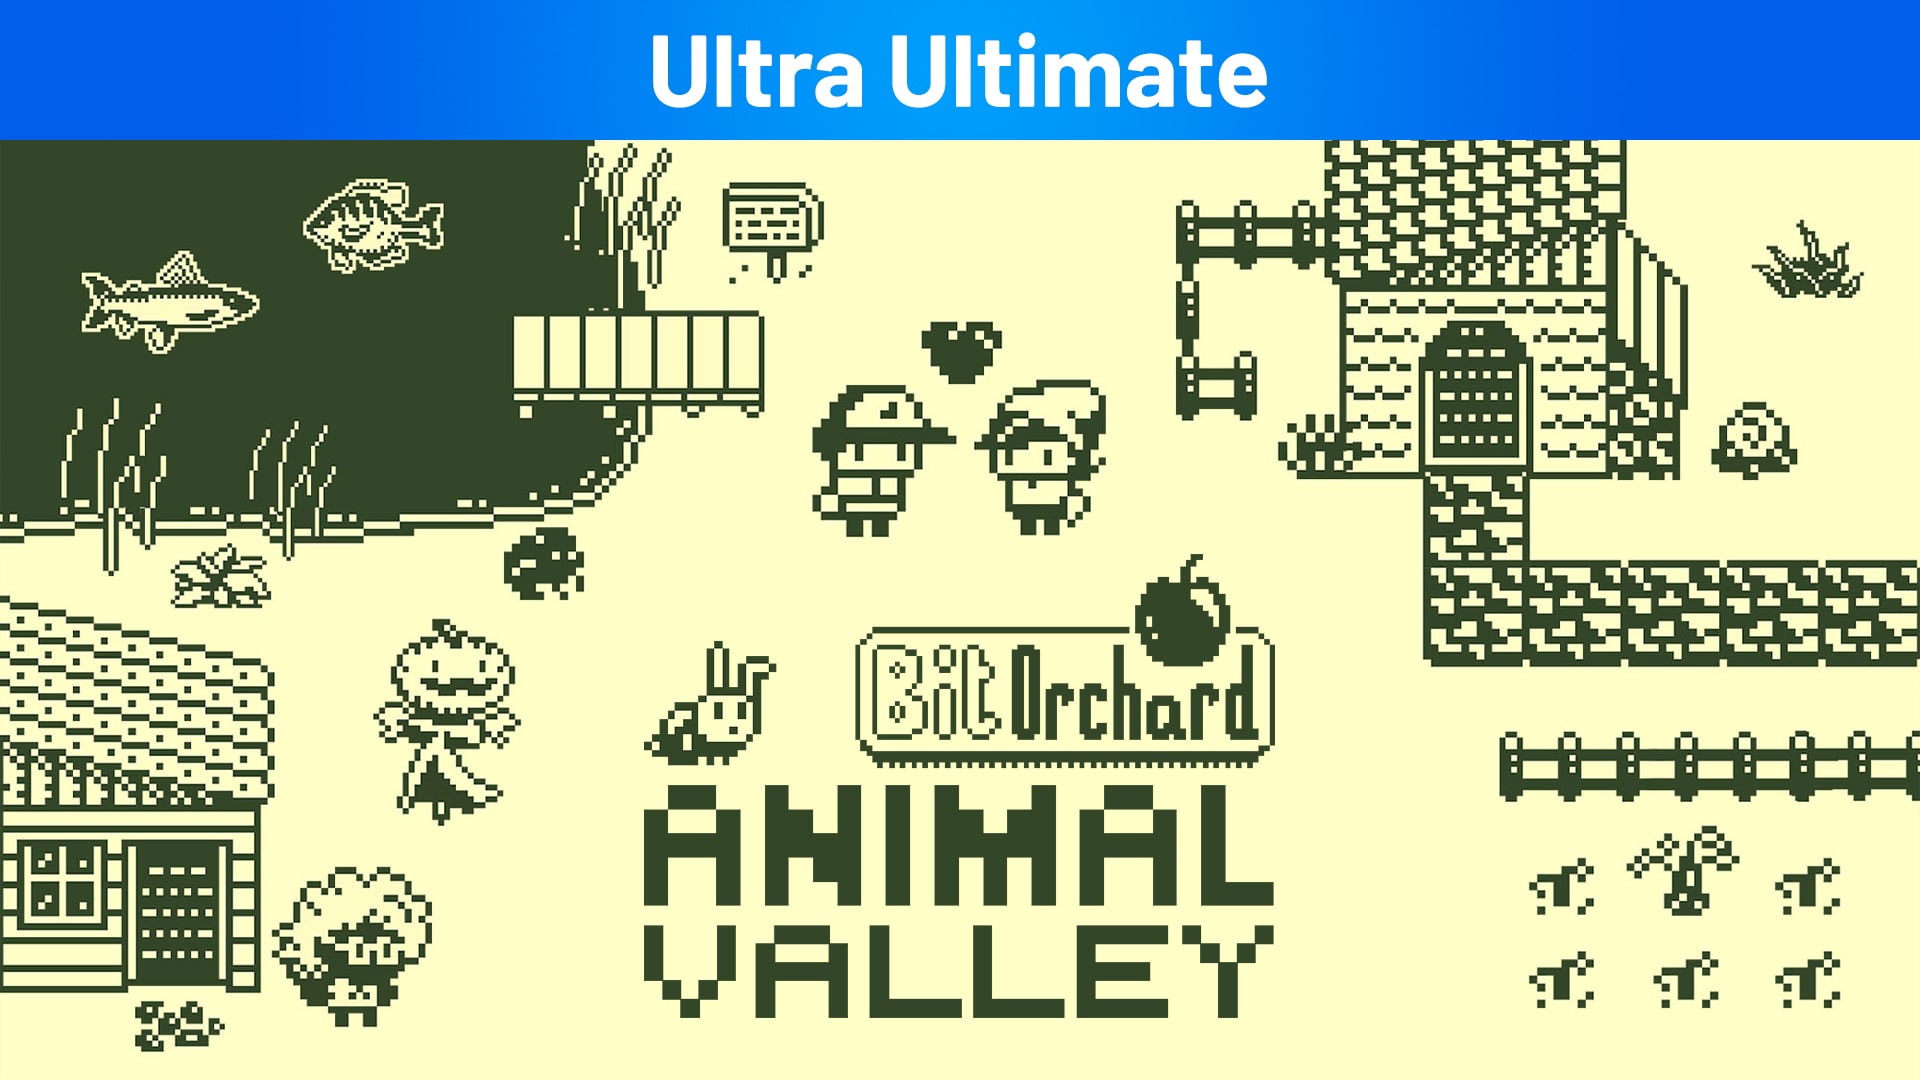 Bit Orchard: Animal Valley Ultra Ultimate